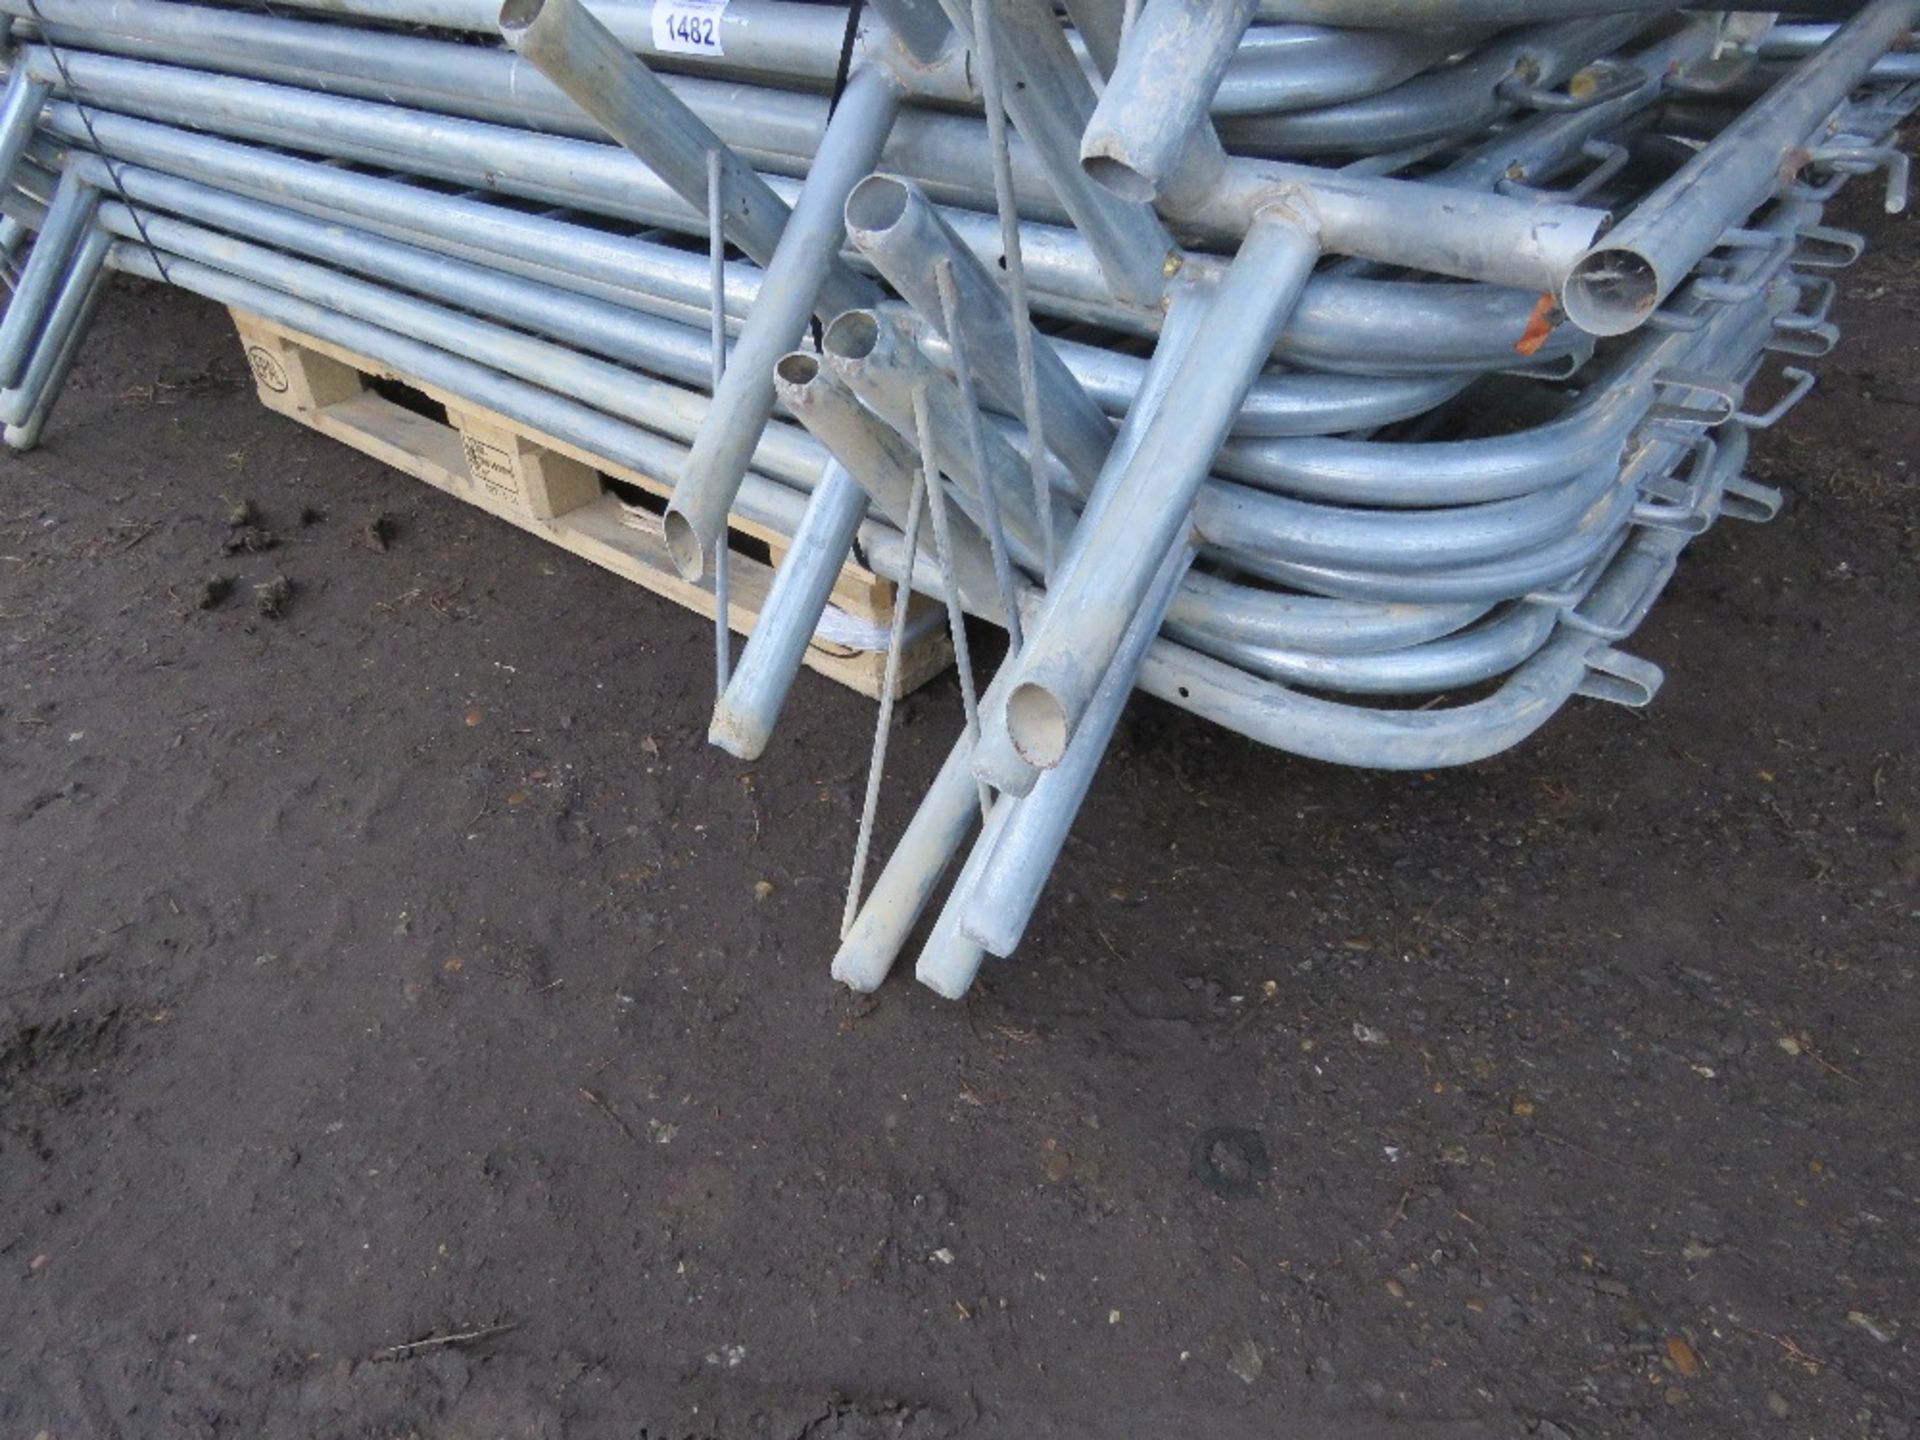 BUNDLE CONTAINING 15NO QUALITY GALVANISED CROWD BARRIERS, MAINLY SMARTWELD BRAND. MANY APPEAR UNUSED